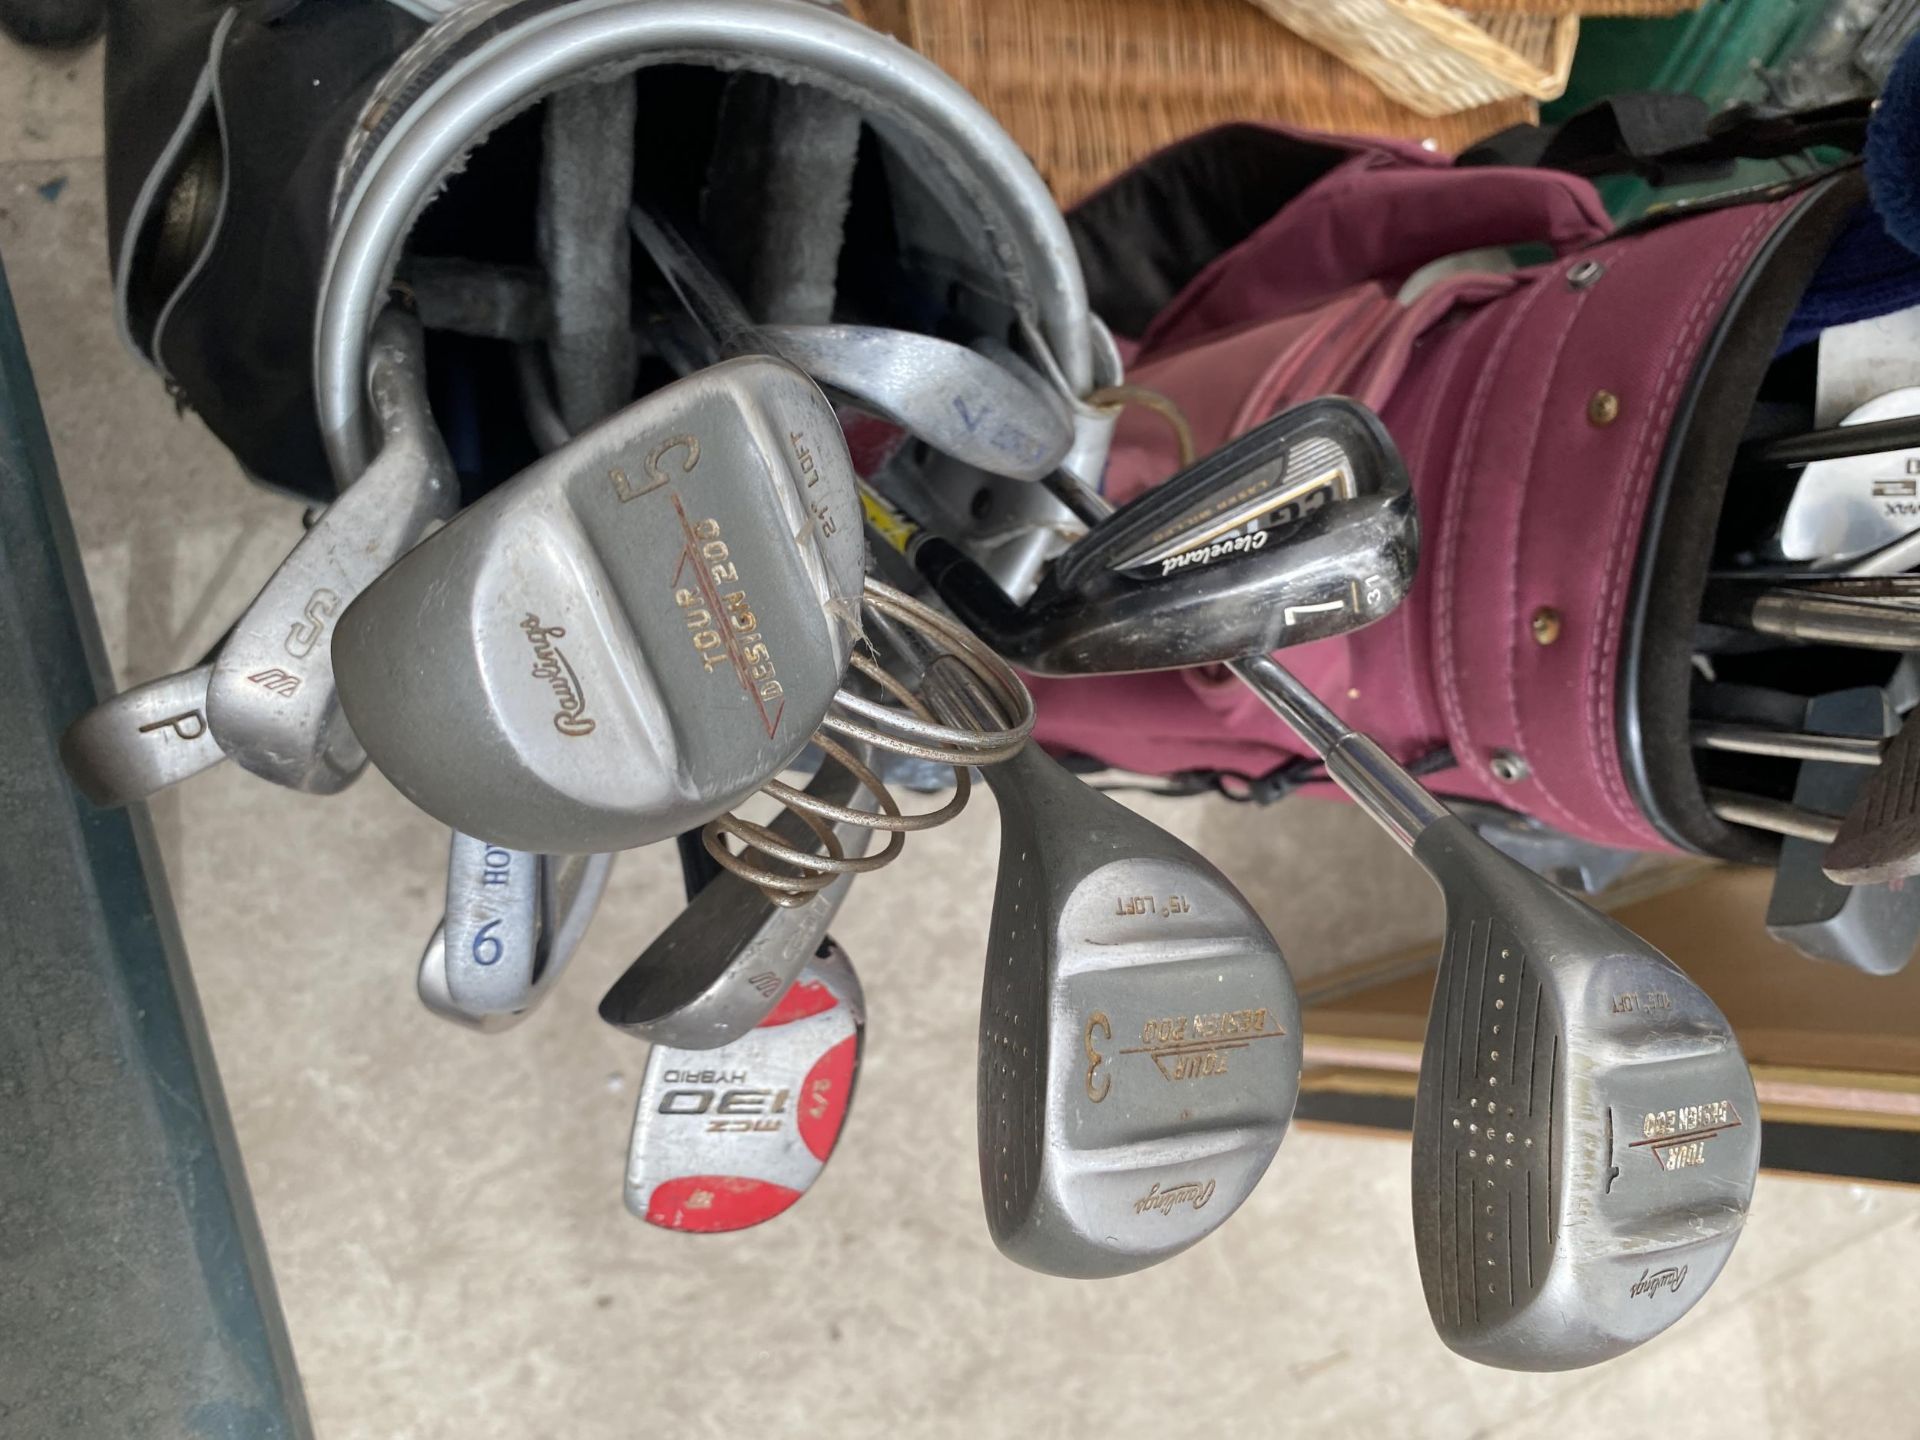 TWO GOLF BAGS AND AN ASSORTMENT OF GOLF CLUBS - Image 4 of 5